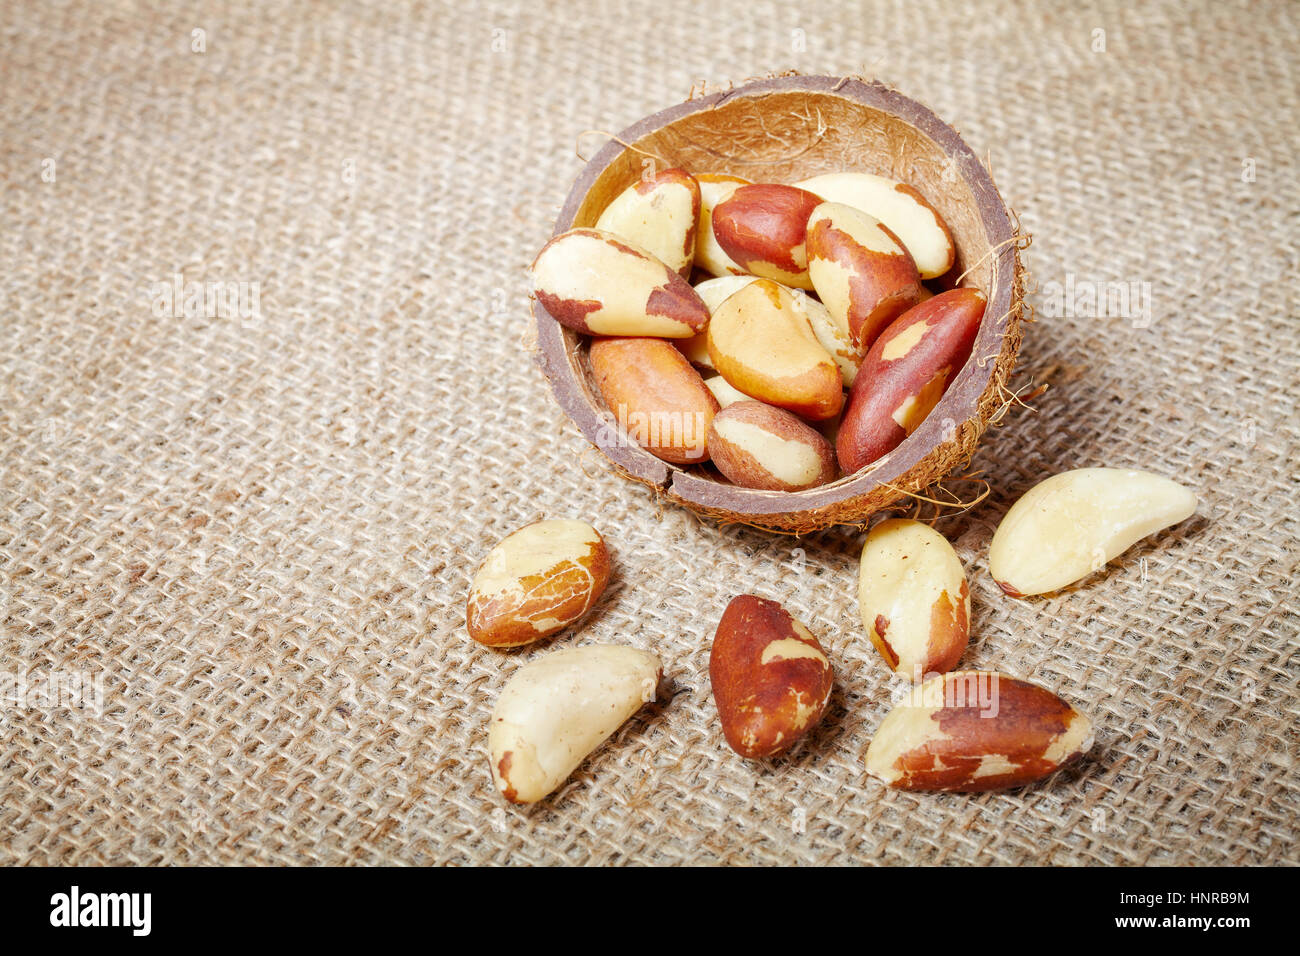 Brazil nuts in a coconut shell on a linen background, copy space. Stock Photo